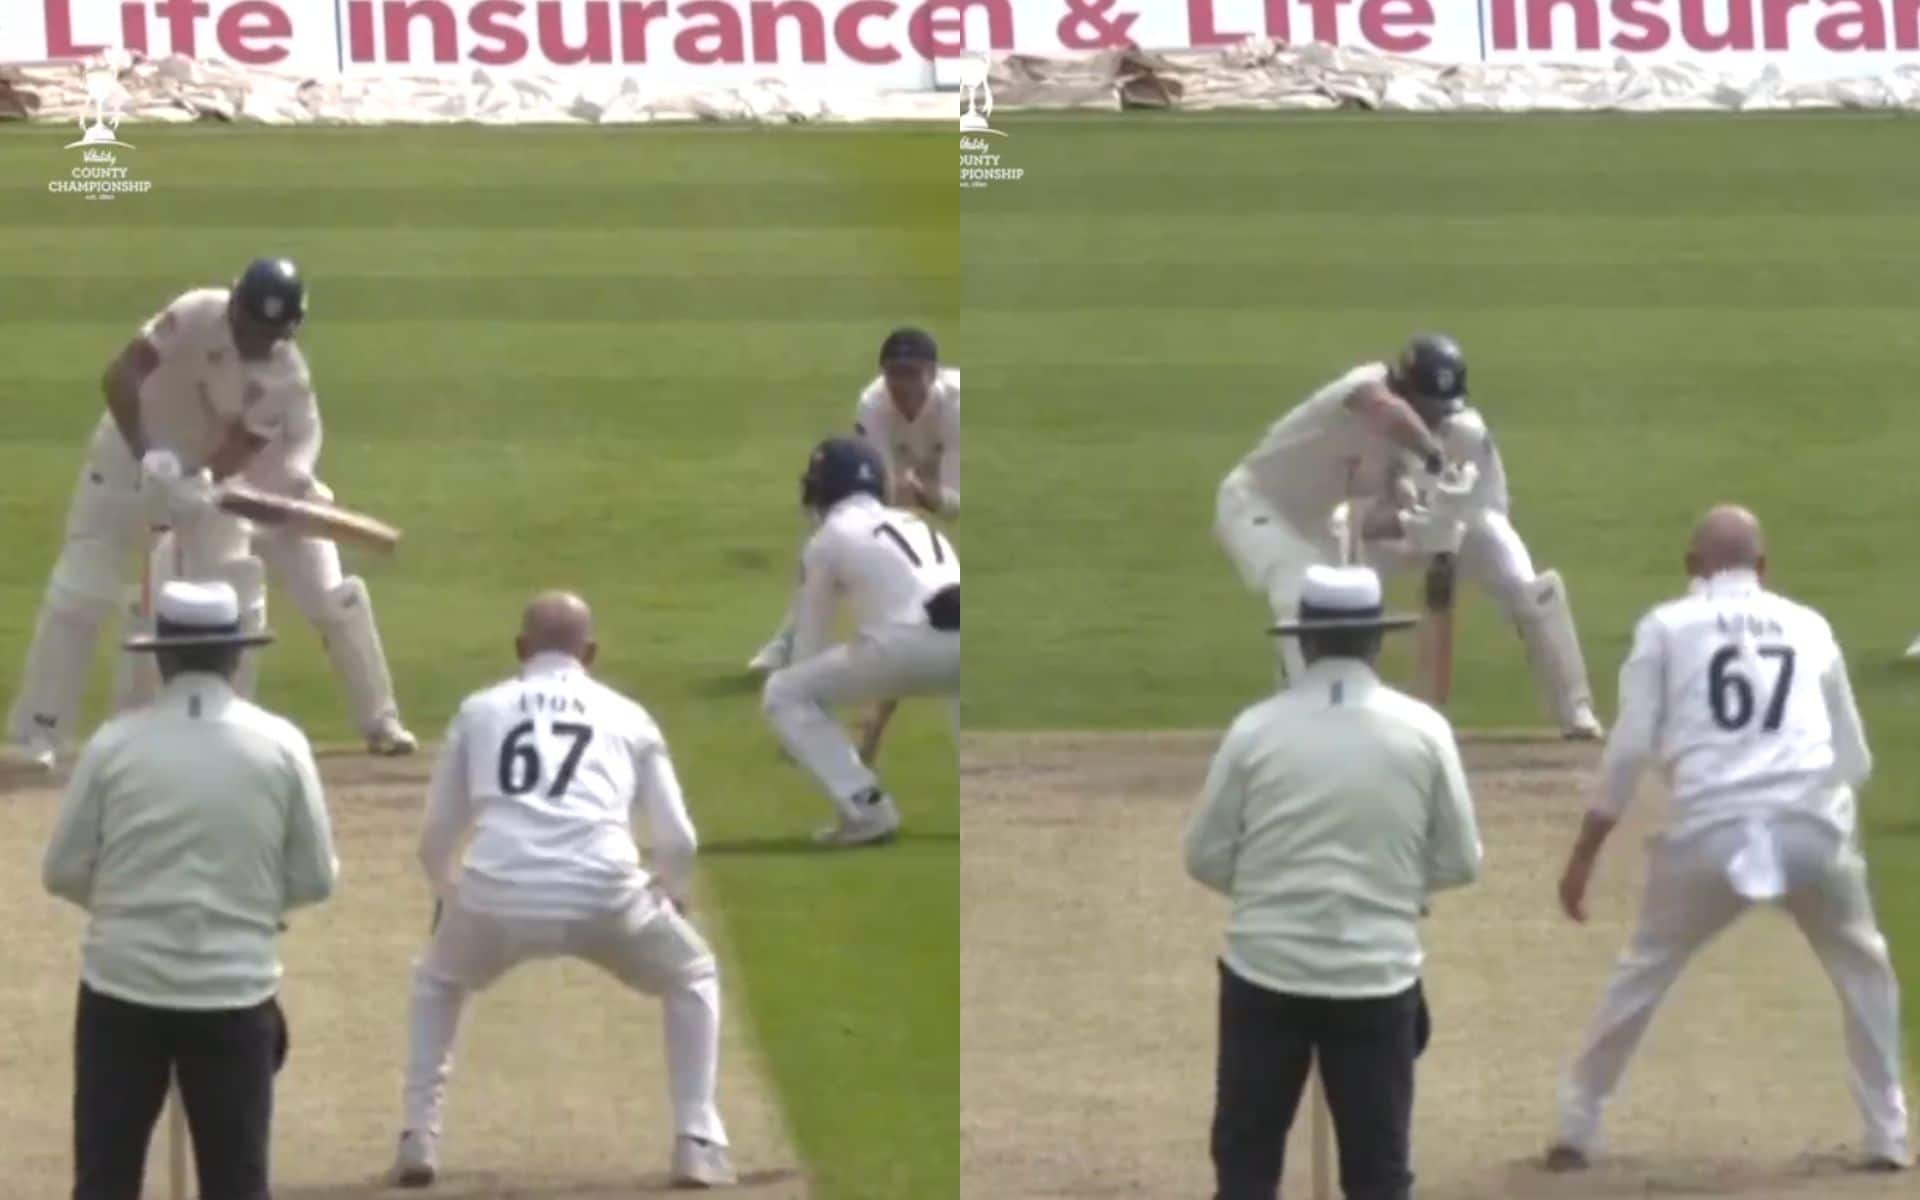 Nathan Lyon's face off with Ben Stokes in English County championship (X.com)